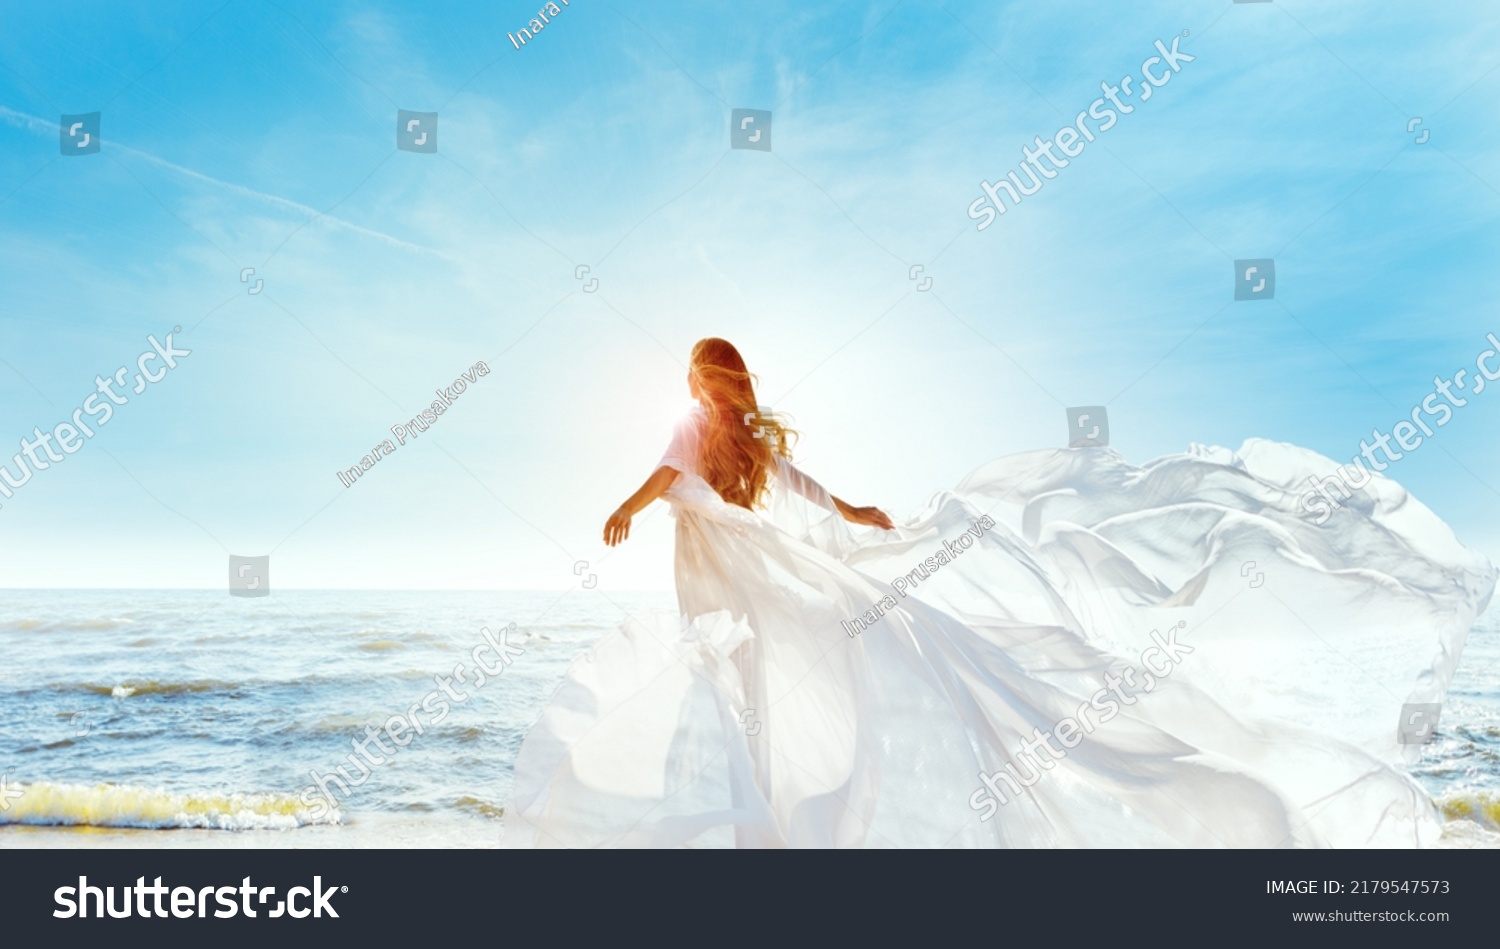 Model in White Dress Flying on Wind. Happy Woman Enjoying Sun looking away at Blue Sky. Carefree Girl dreaming at Sea Beach Resort. Freedom and Spiritual Relax Concept #2179547573